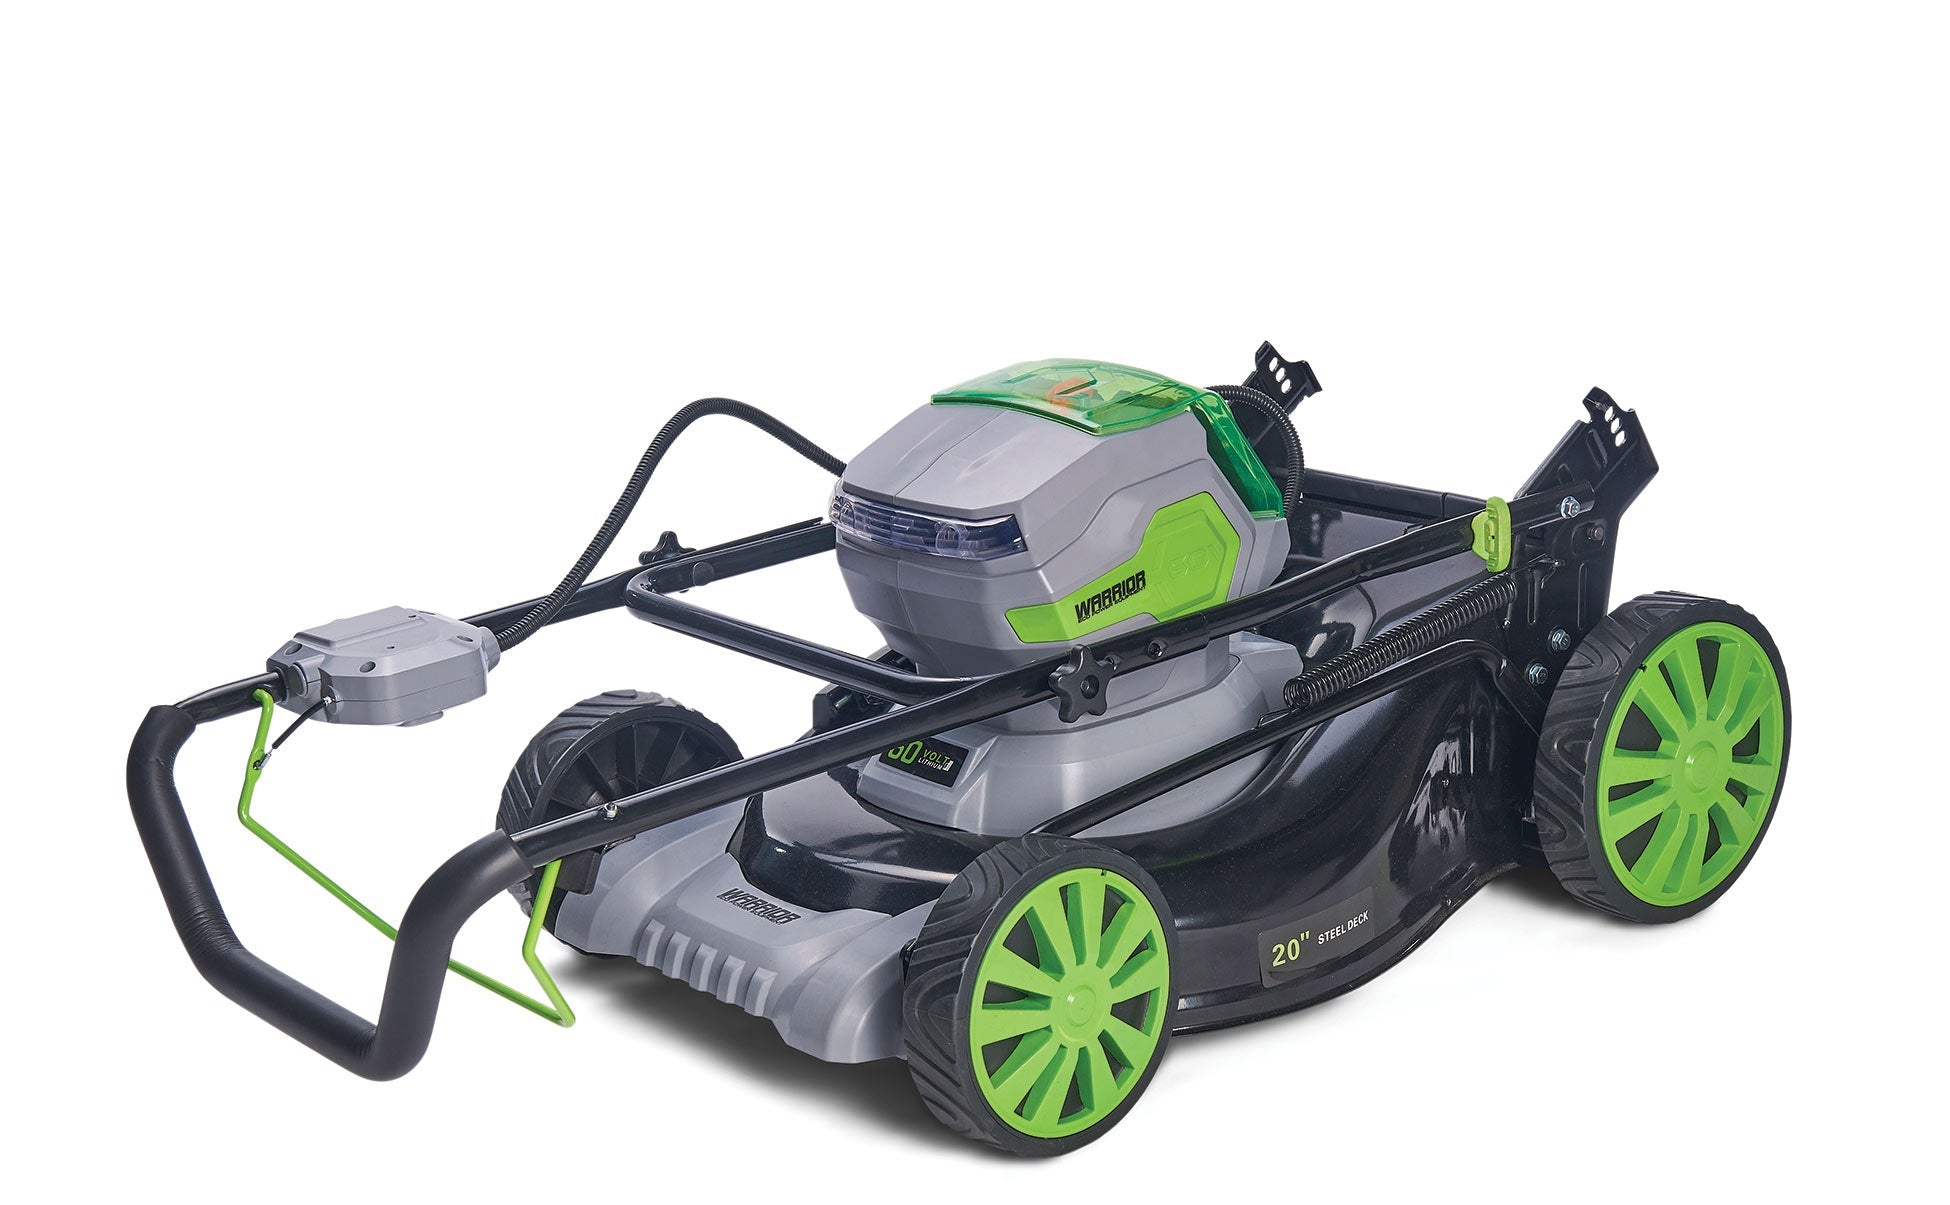 Packed away mode of Cordless 50cm Self Propelled Lawn Mower